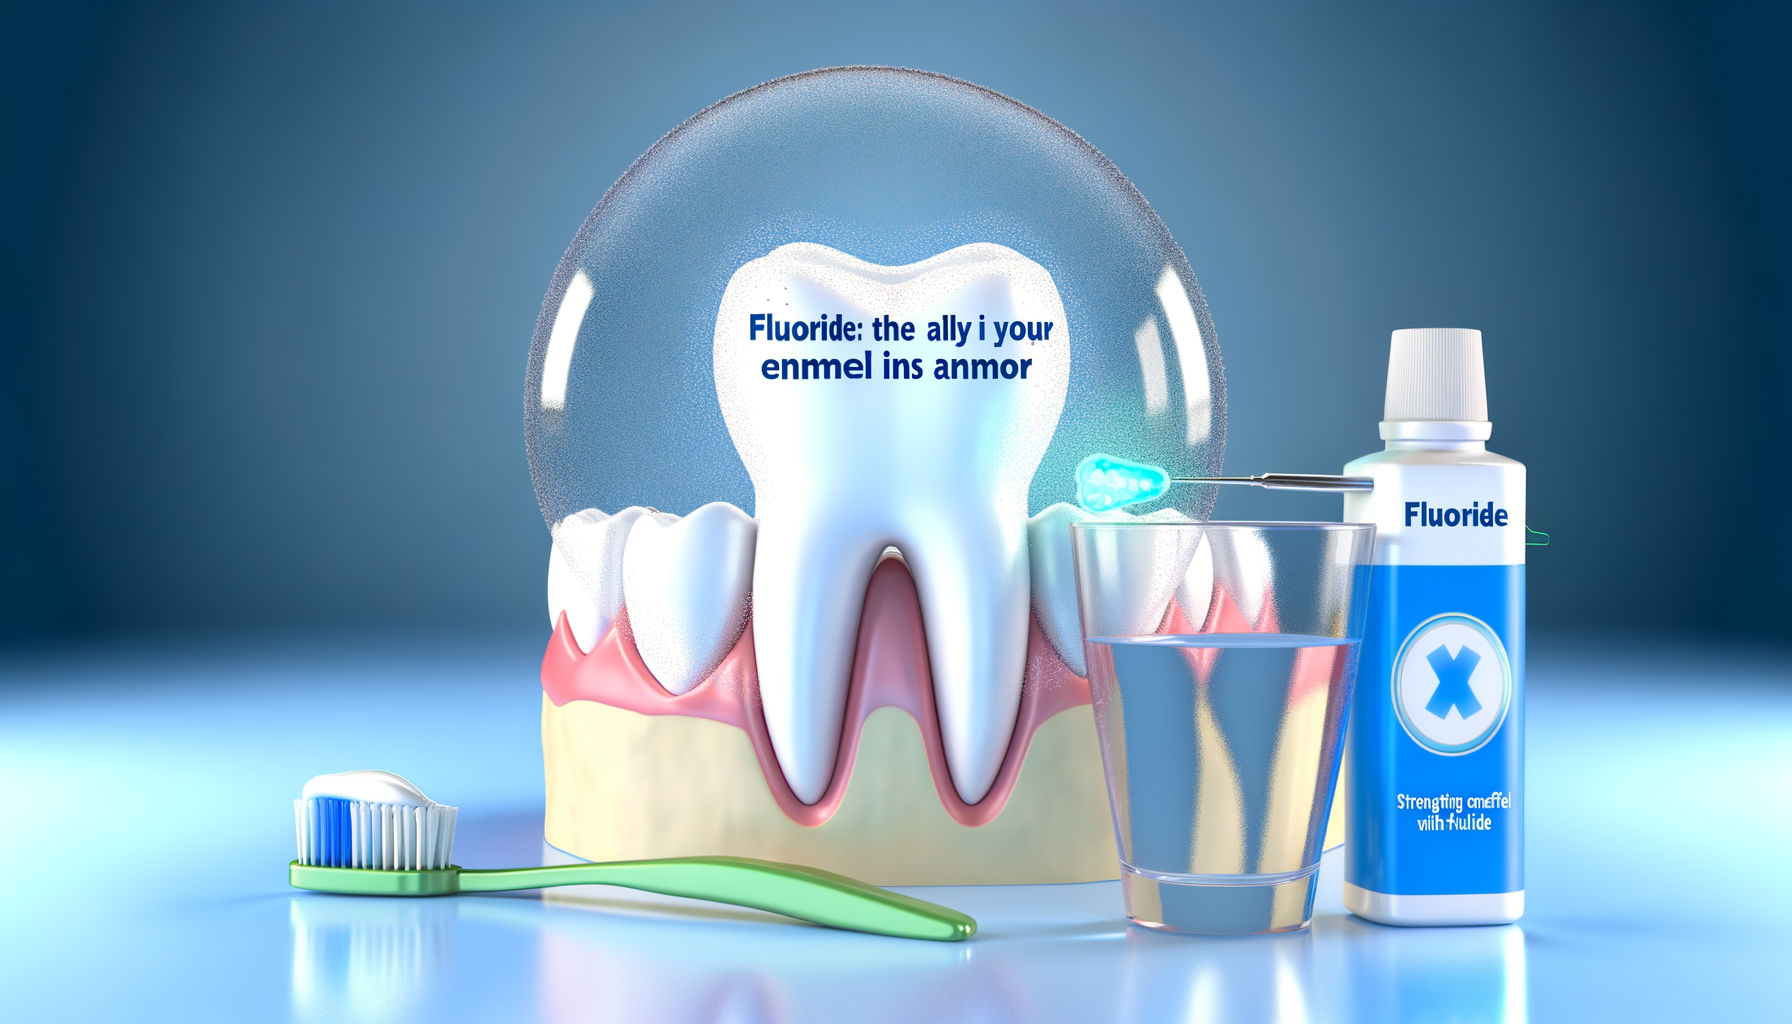 Fluoride: The Ally in Your Enamel's Armor